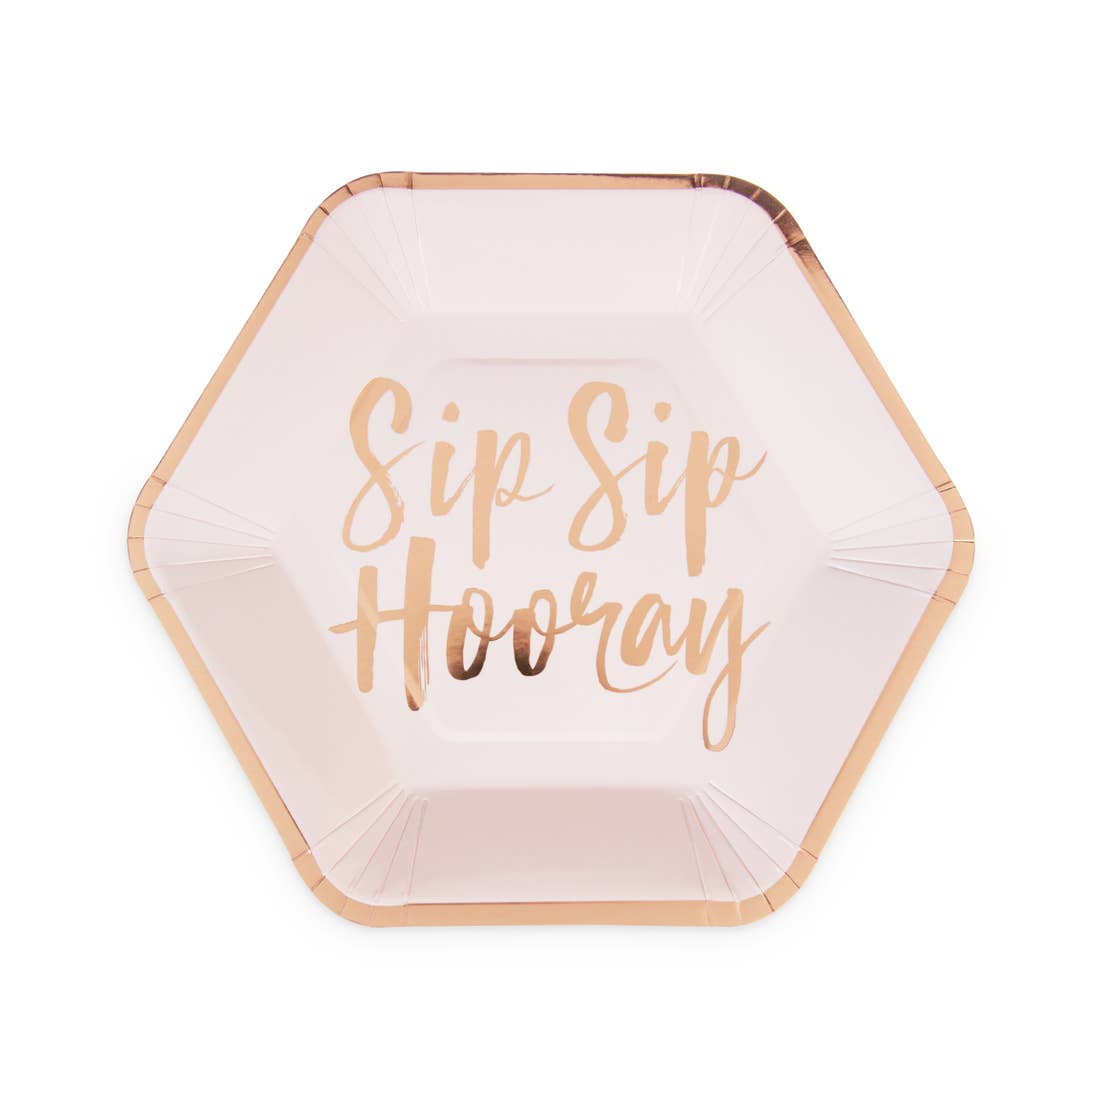 Sip Sip Hooray Cocktail Party in a Box